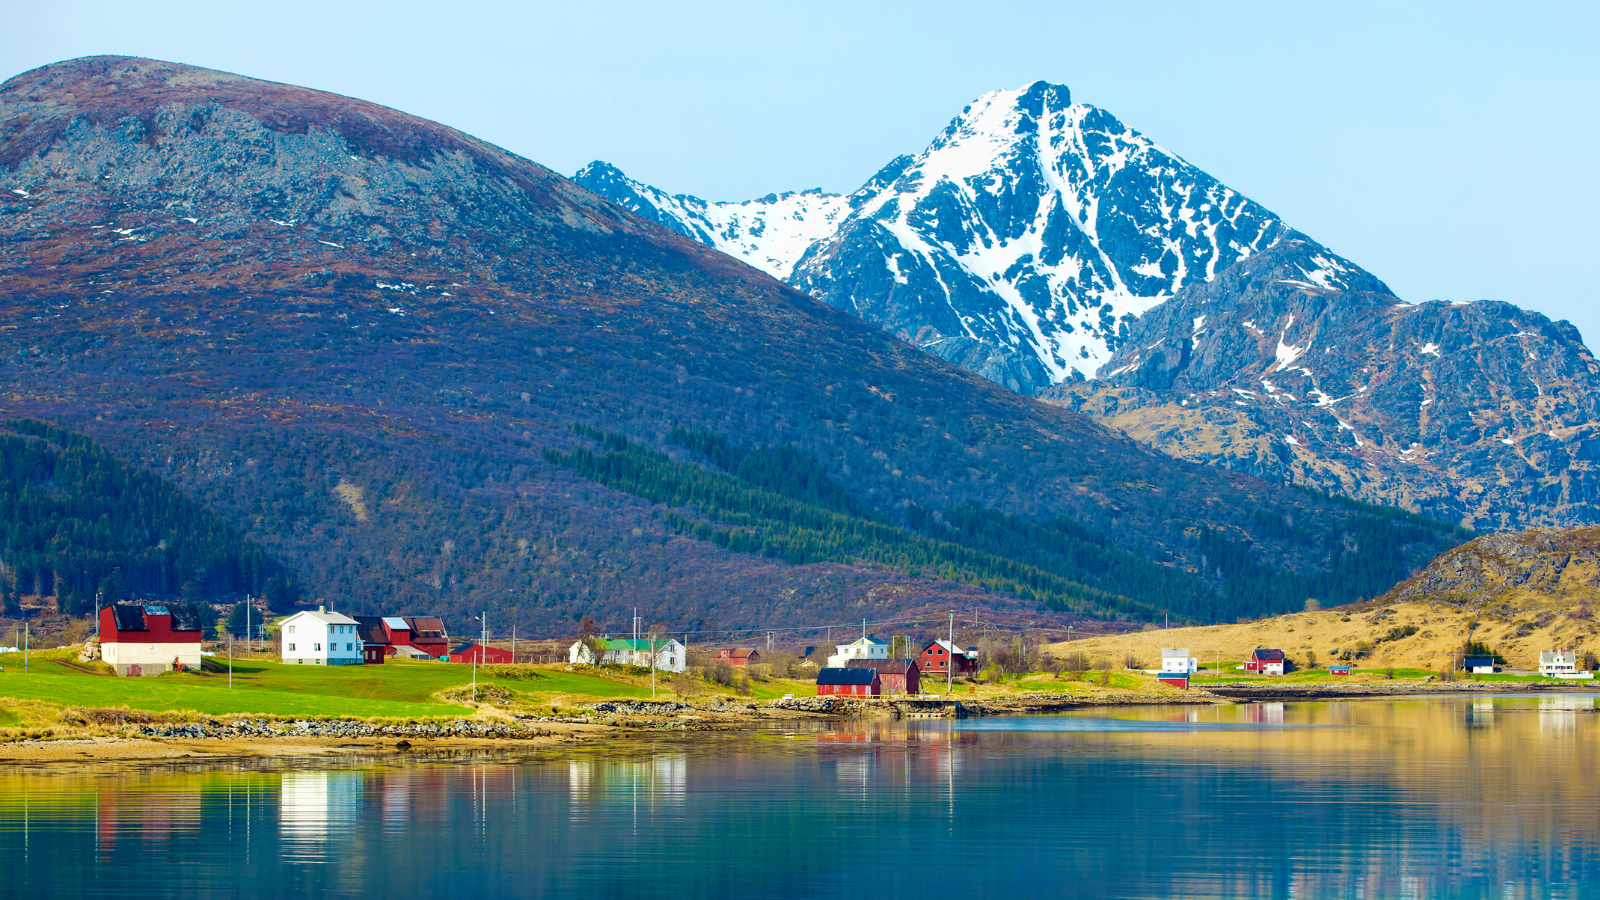 The sixth thing in the list of 10 best things to do in Norway - Immerse yourself in the Norwegian way of life at Henningsvær